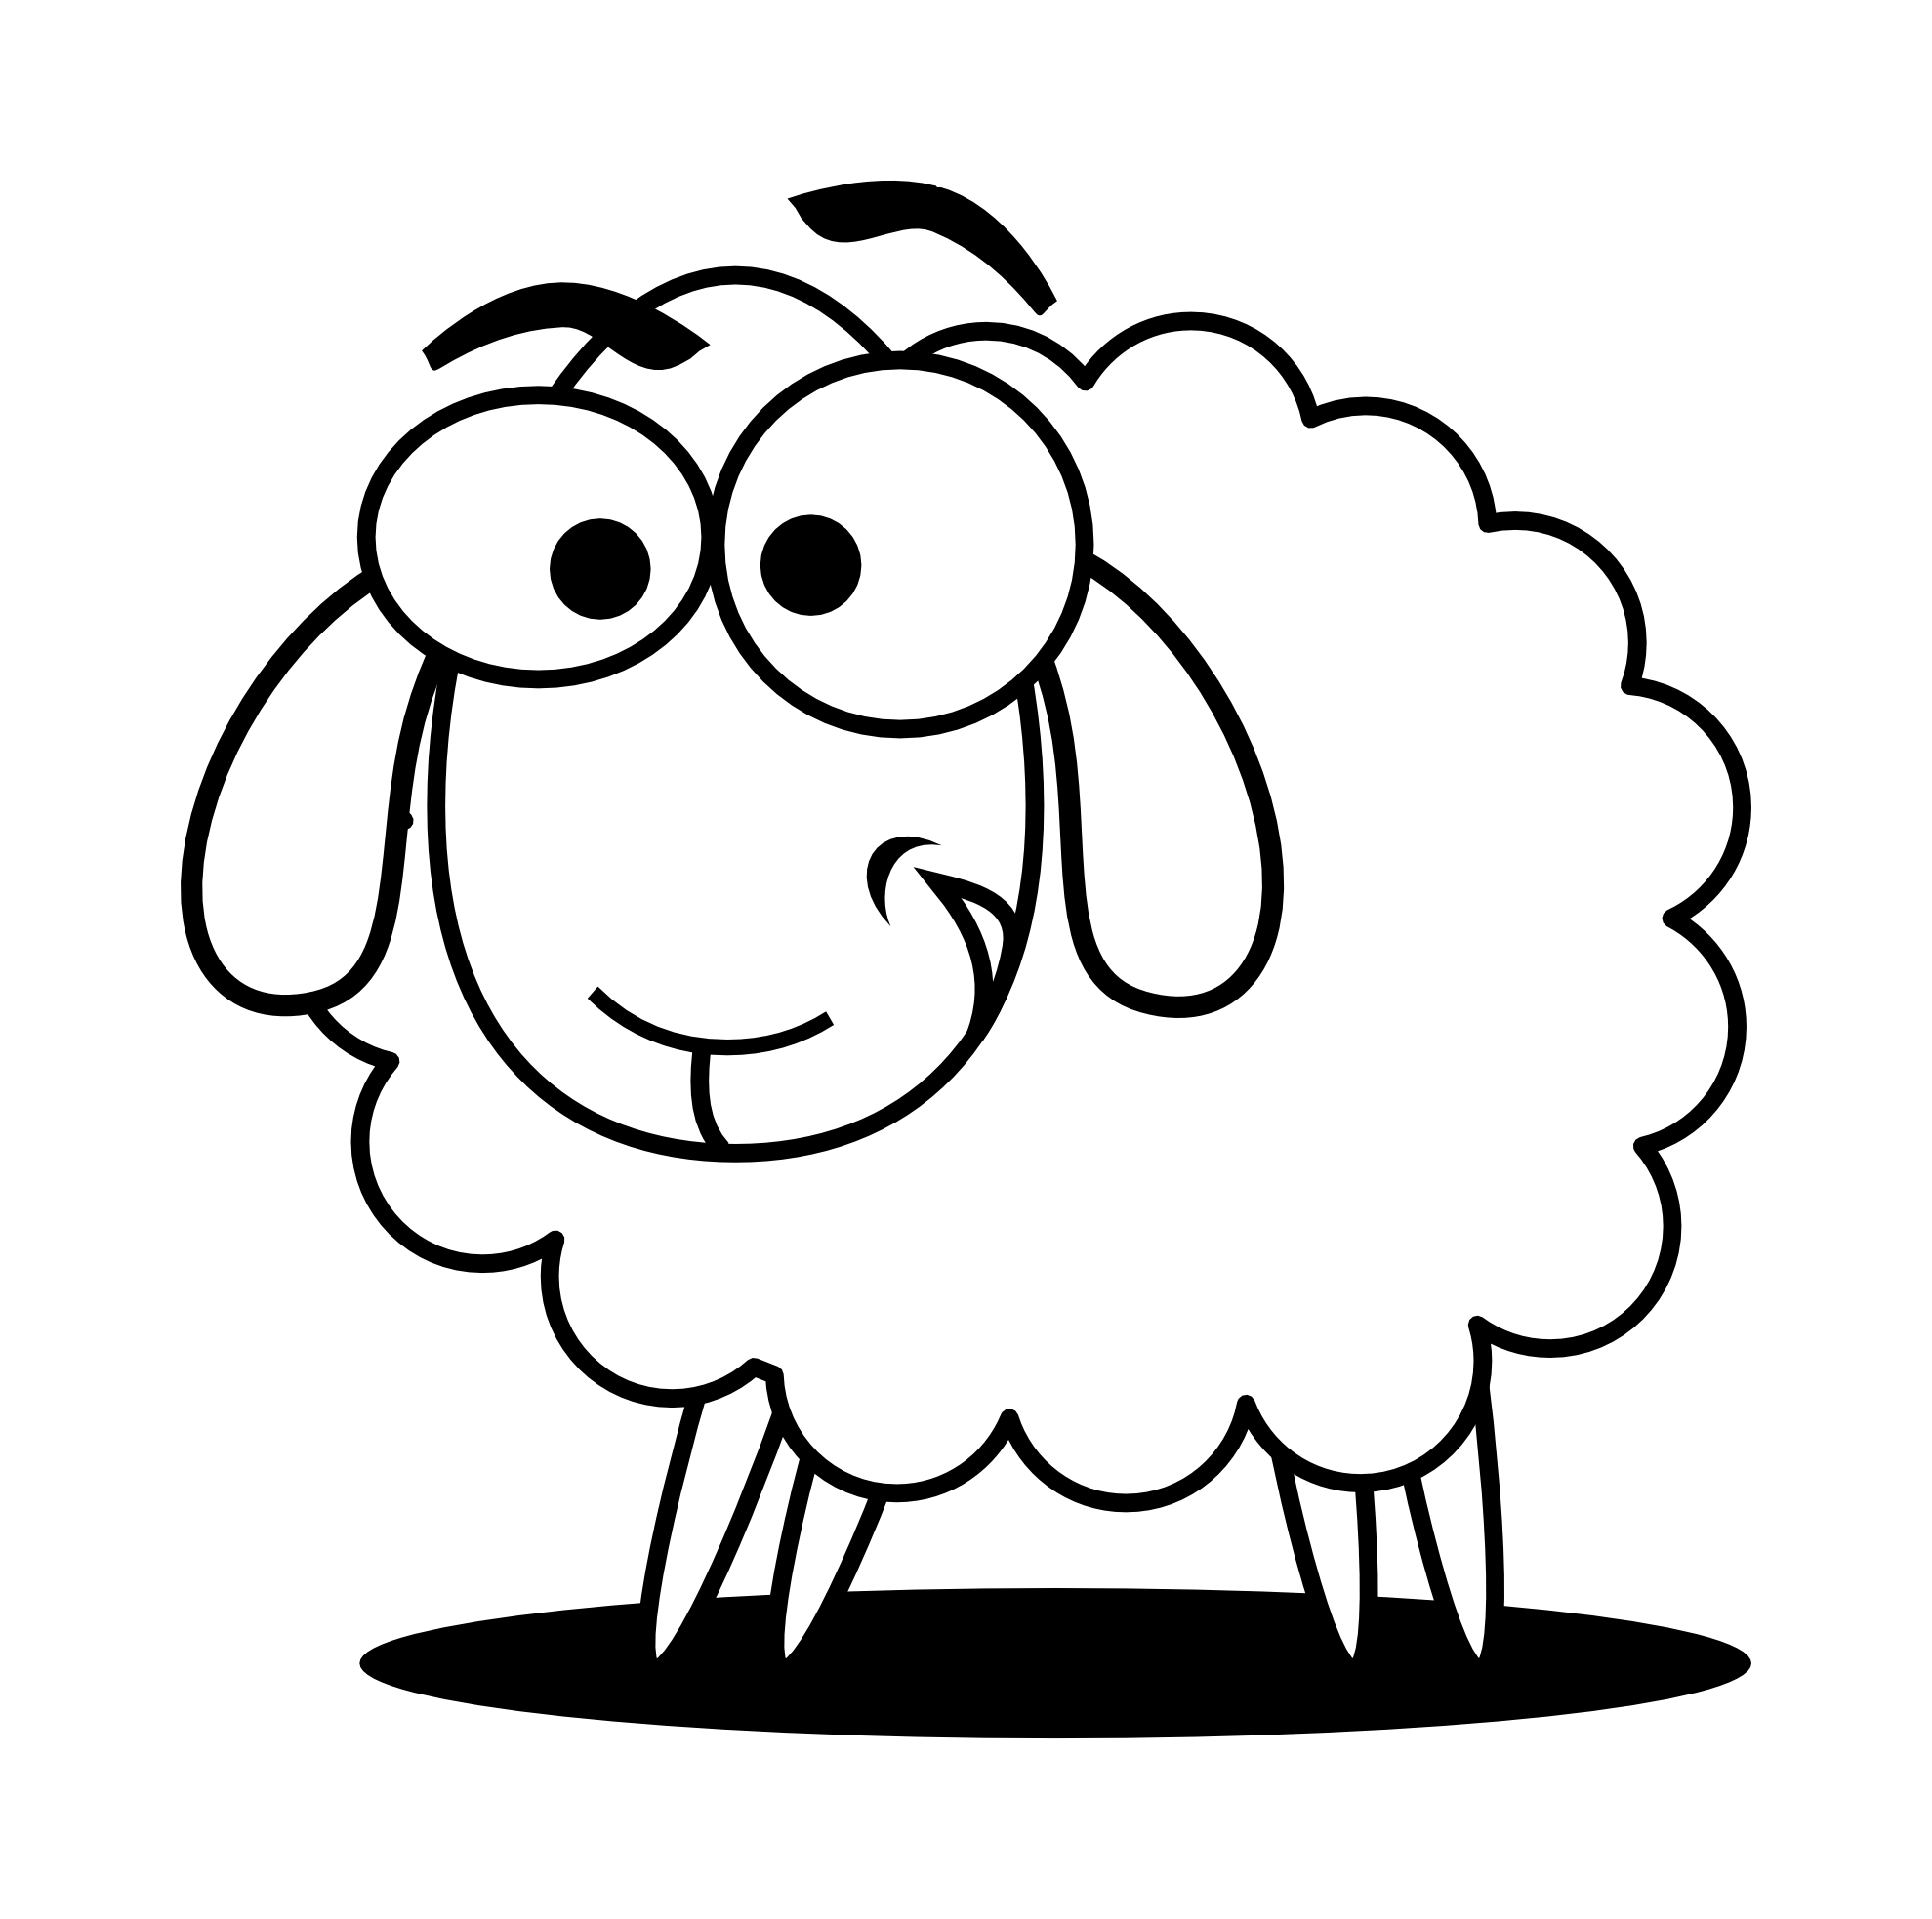 Angry black sheep clipart free clipart image